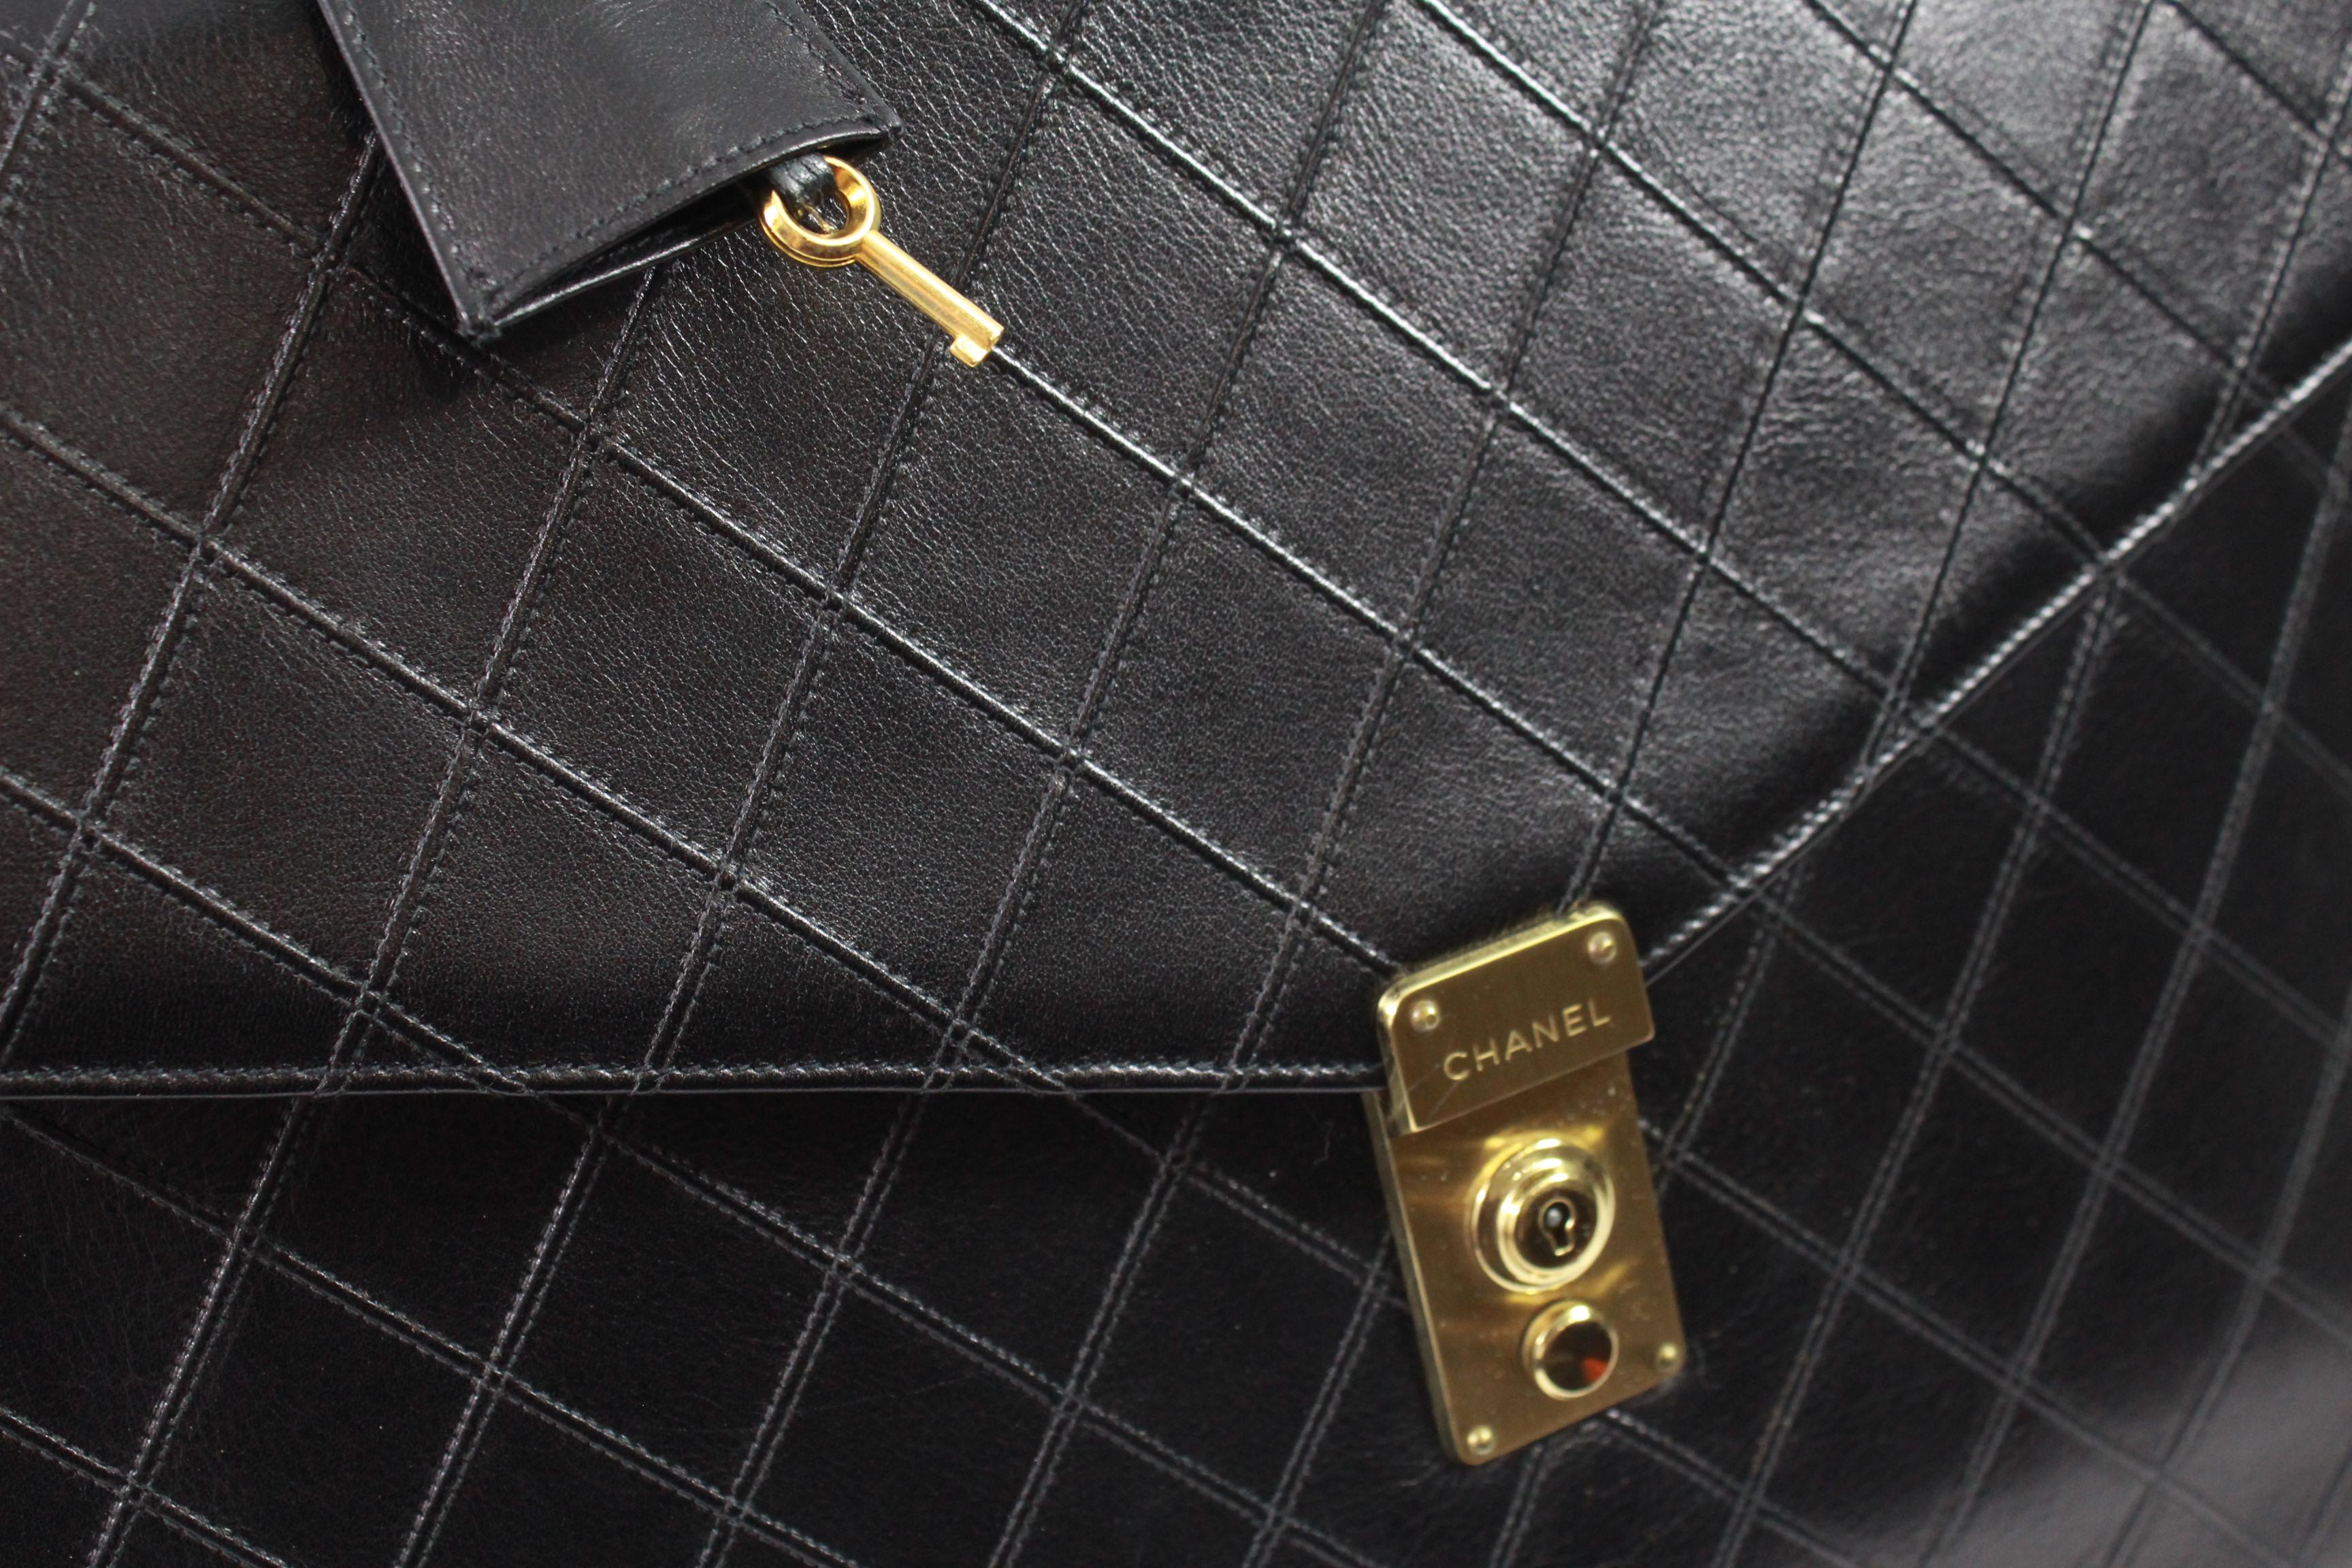 Chanel Briefcase in Black Lambskin leather 4